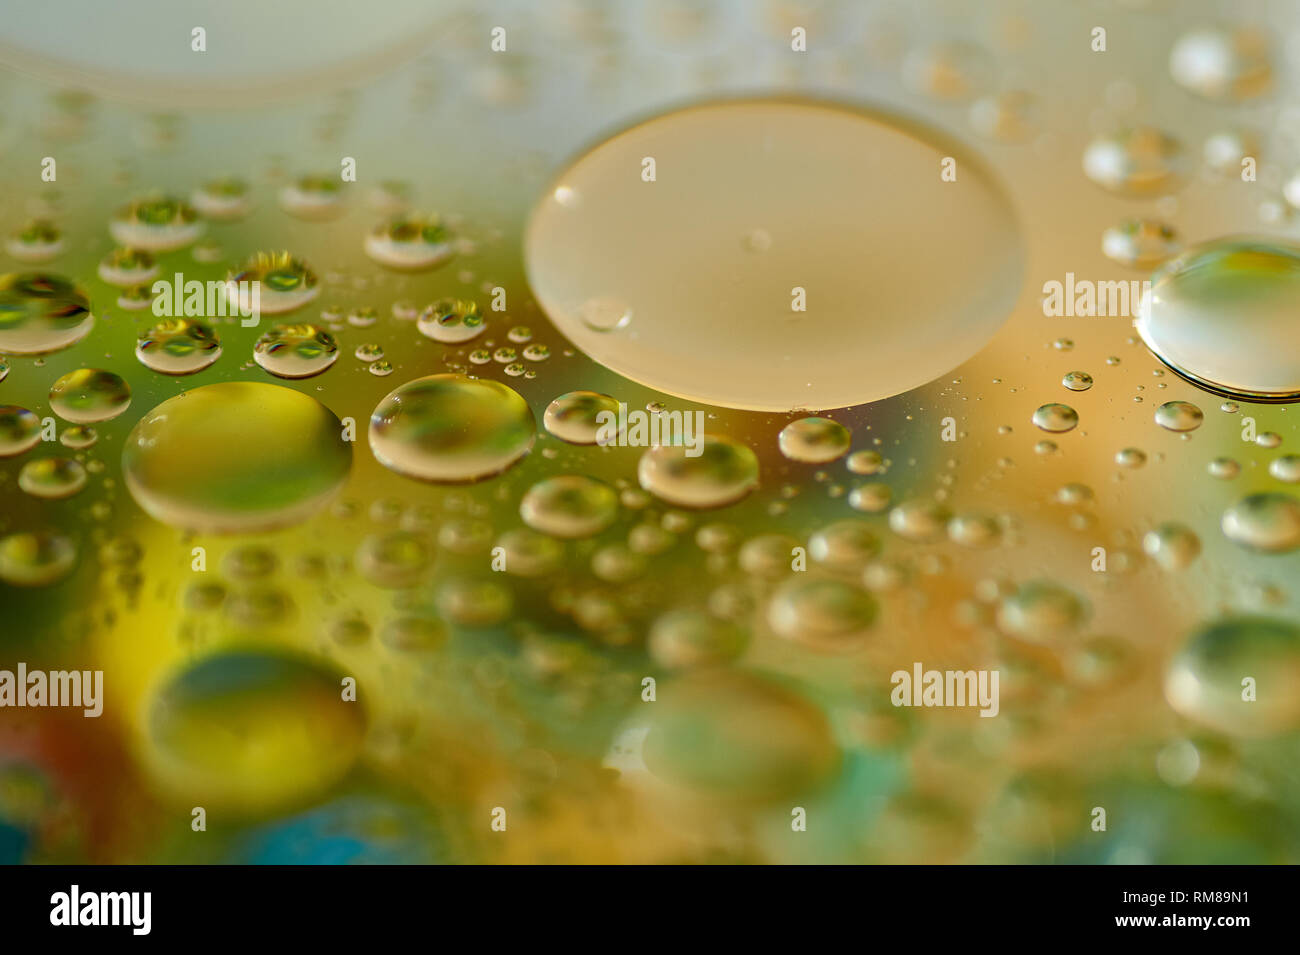 Download Floating In The Water Abstract Colorful Yellow Oil Drops Stock Photo Alamy Yellowimages Mockups